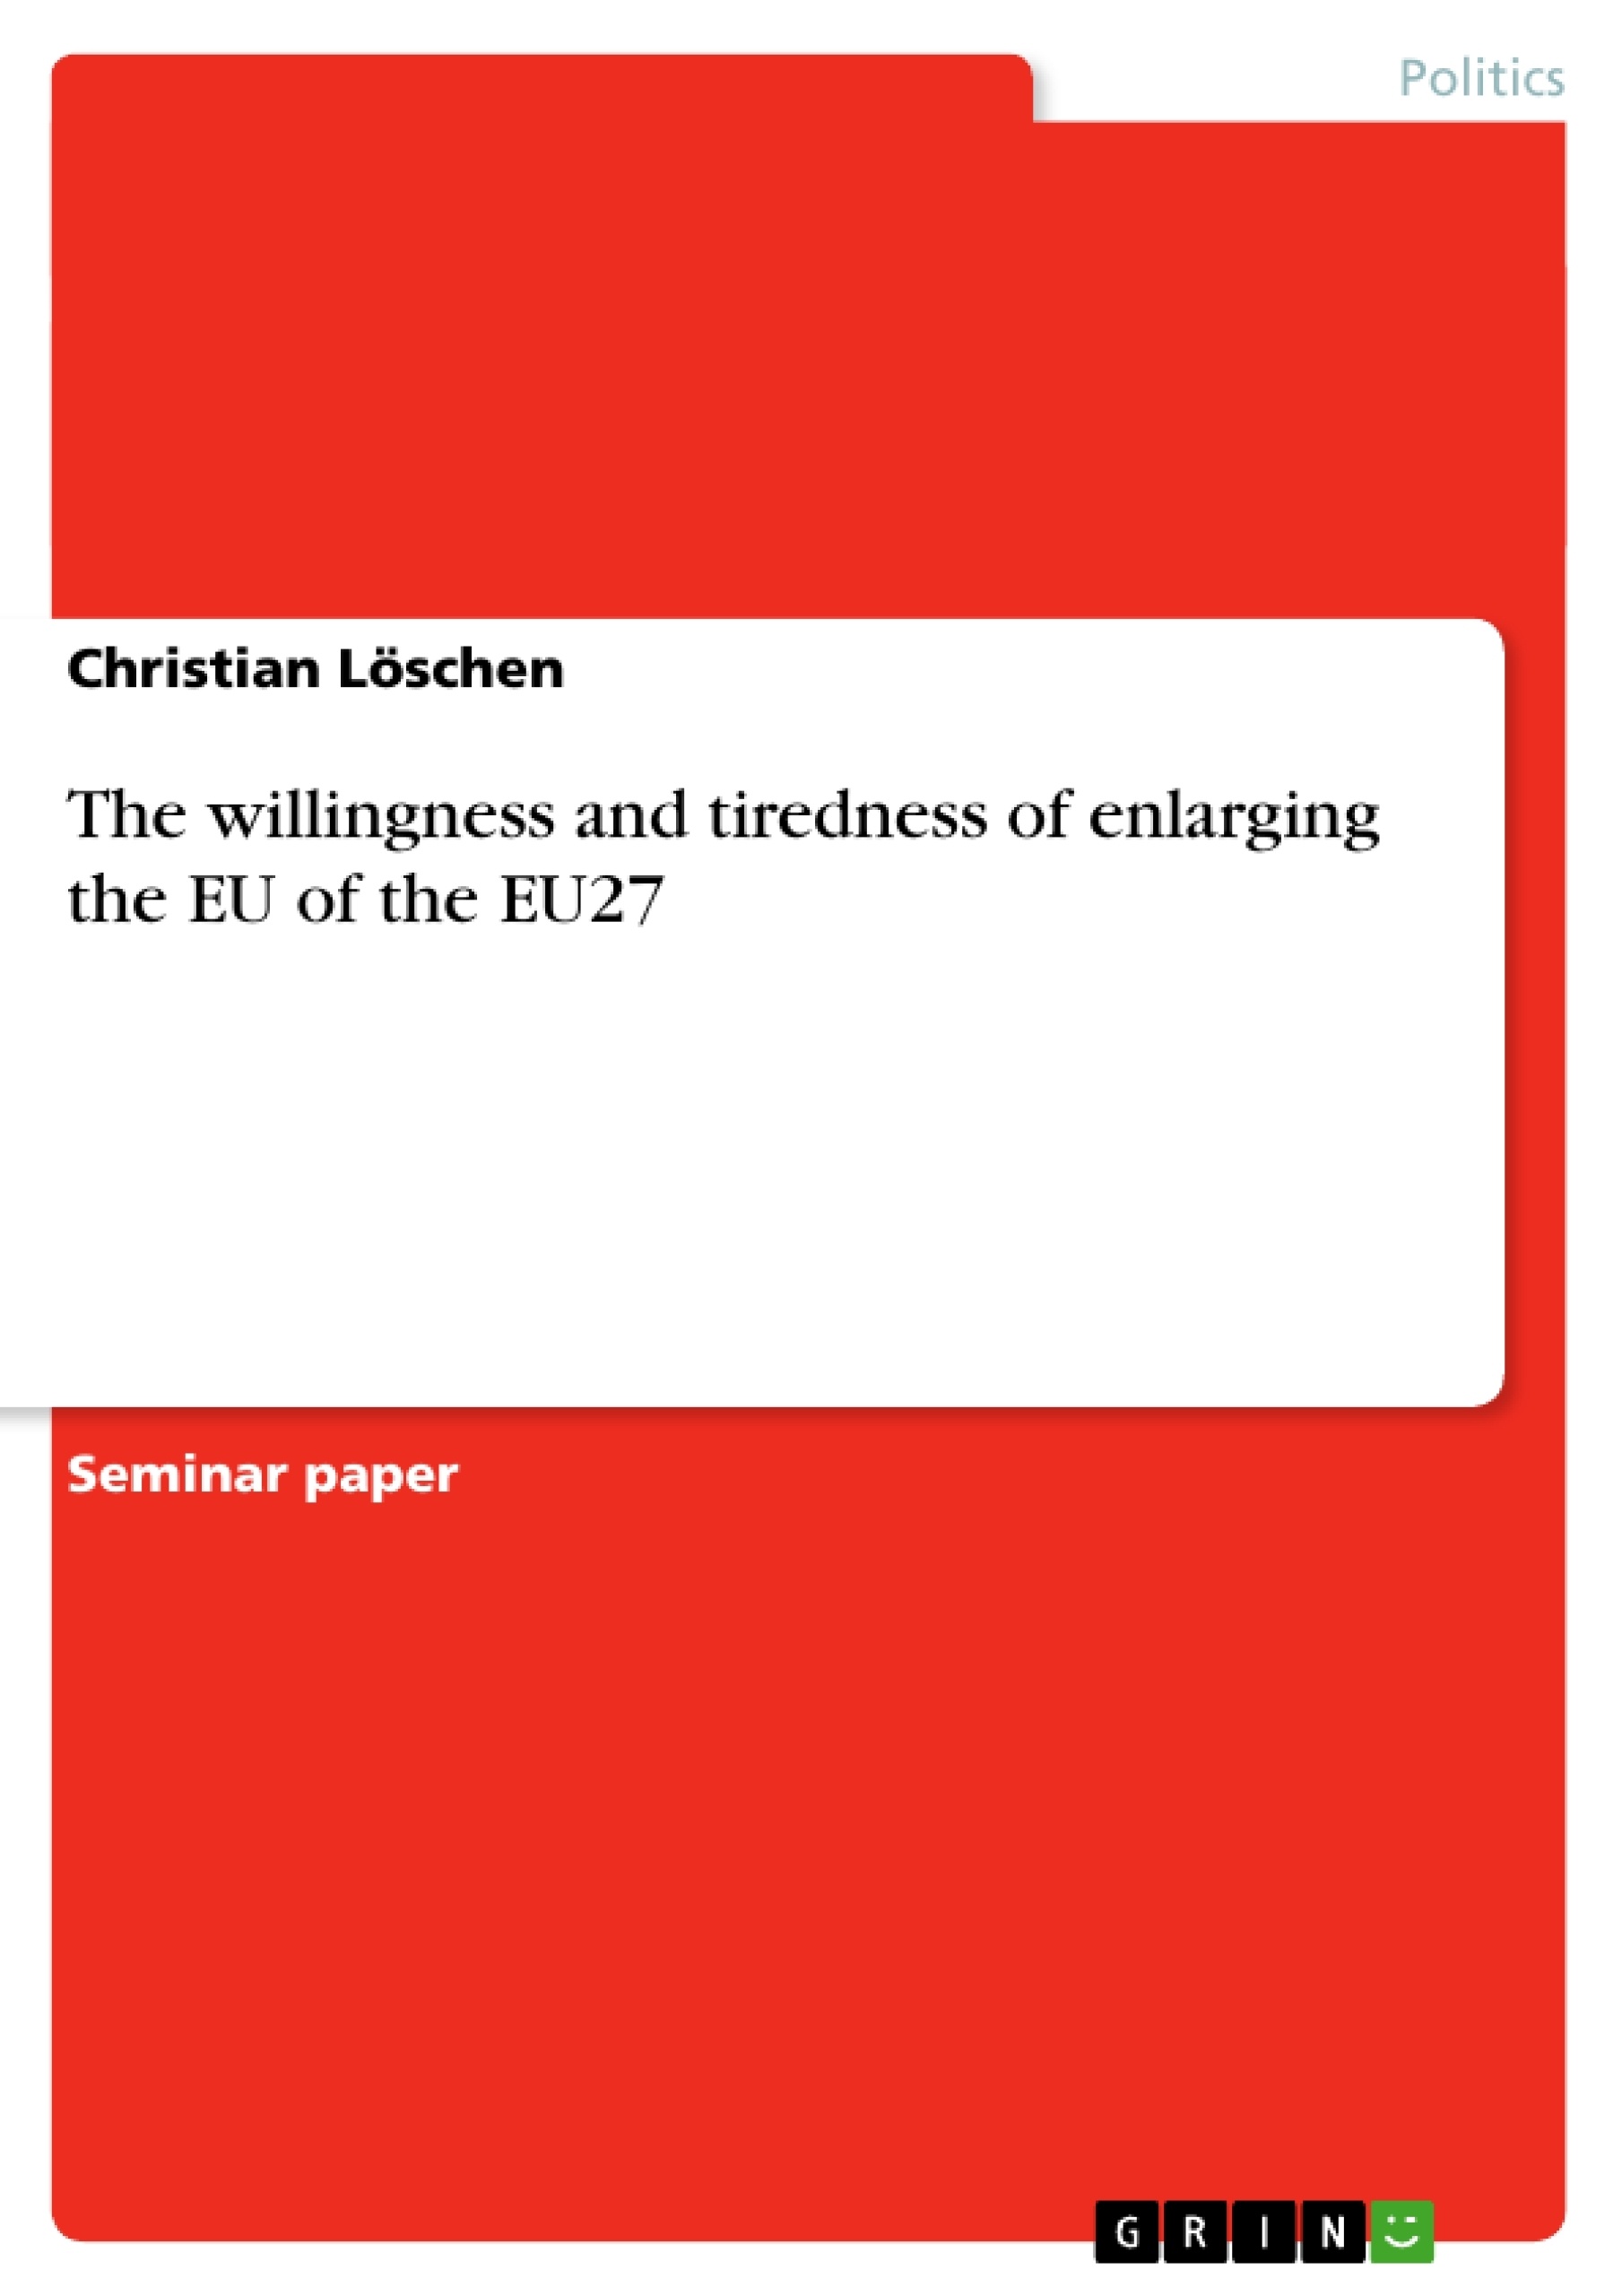 Title: The willingness and tiredness of enlarging the EU of the EU27